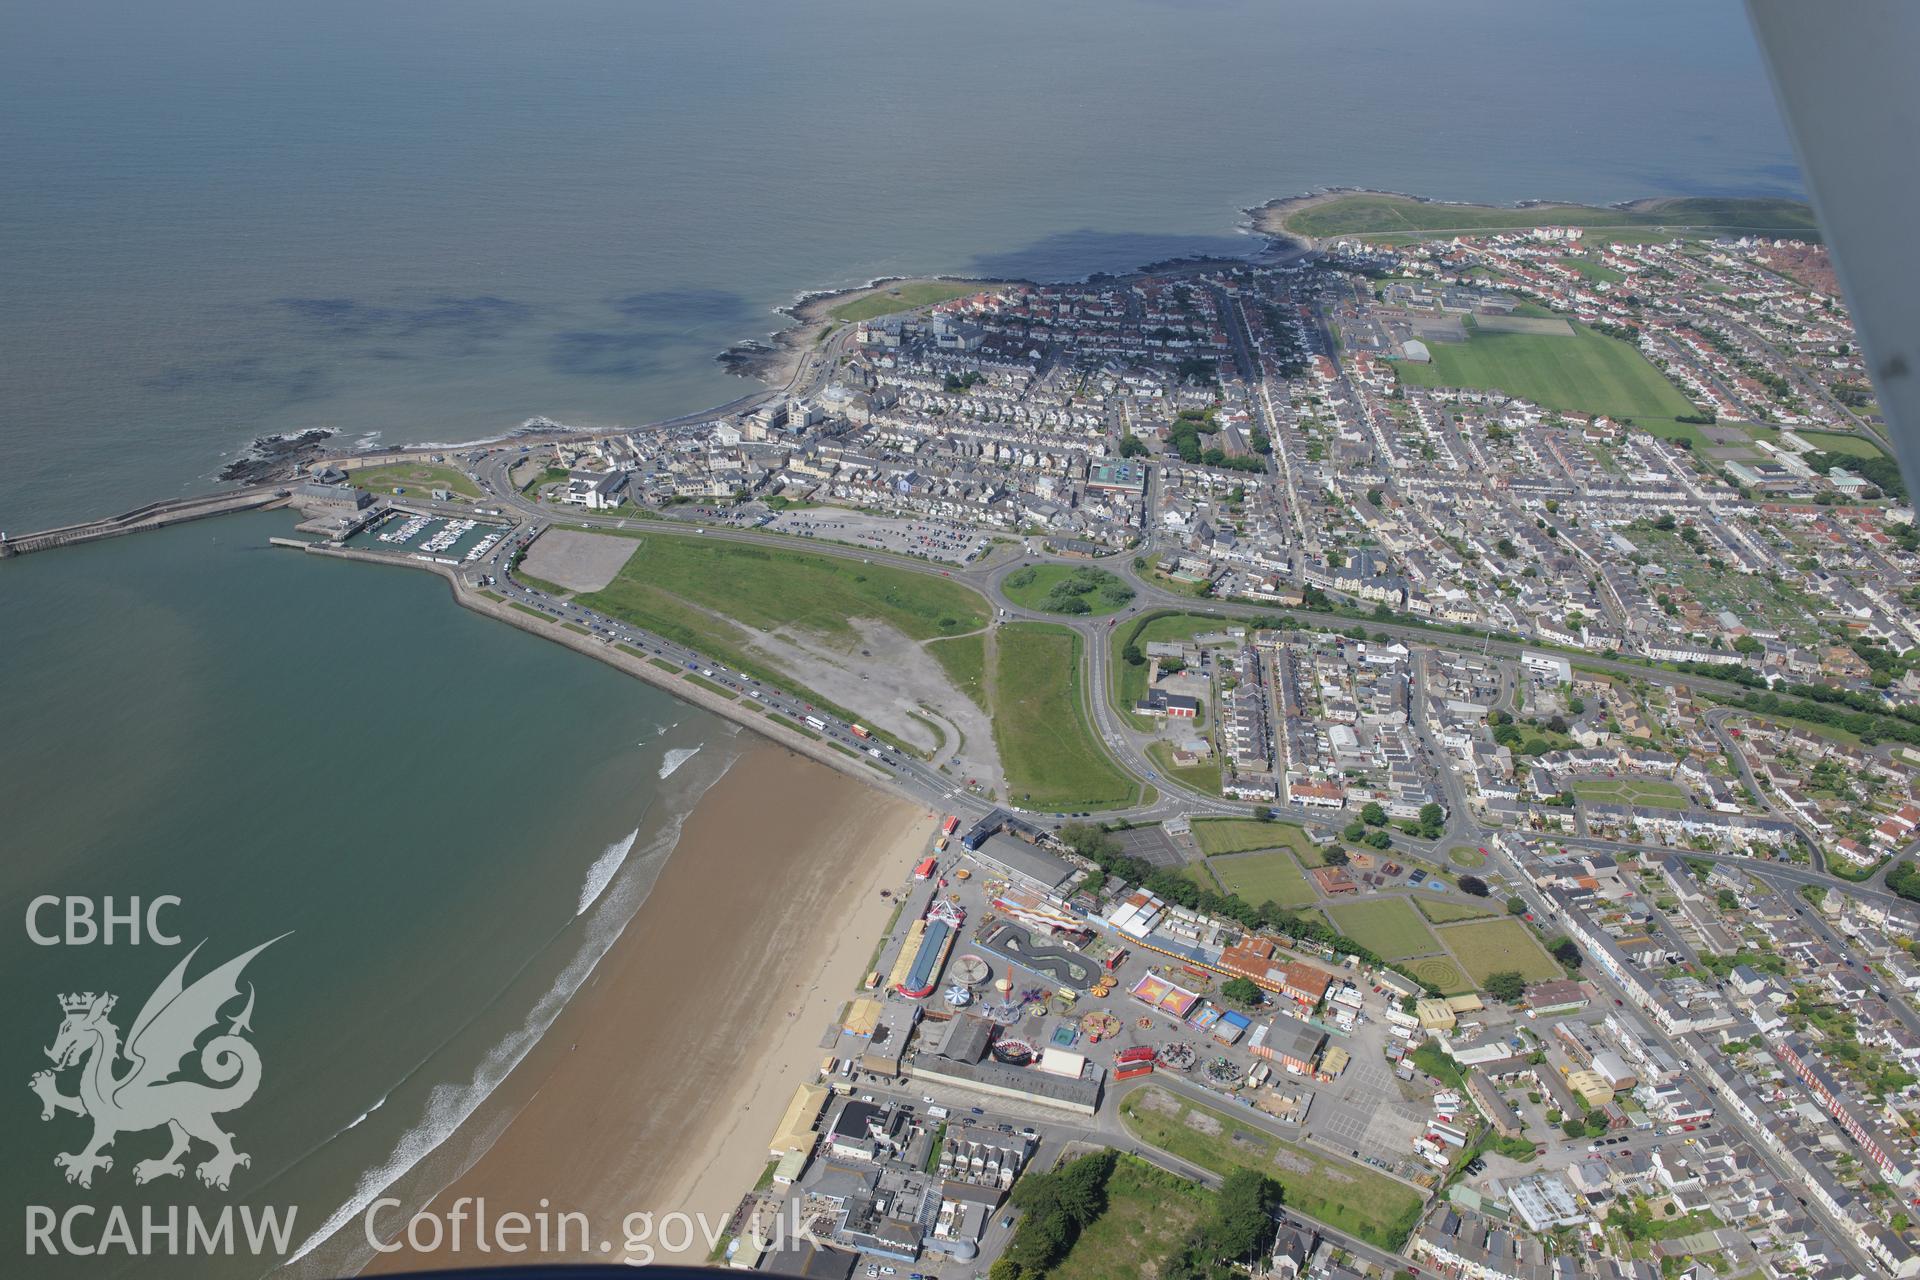 Views of Porthcawl Harbour, lifeboat station, coastguard station and the town of Porthcawl. Oblique aerial photograph taken during the Royal Commission's programme of archaeological aerial reconnaissance by Toby Driver on 19th June 2015.